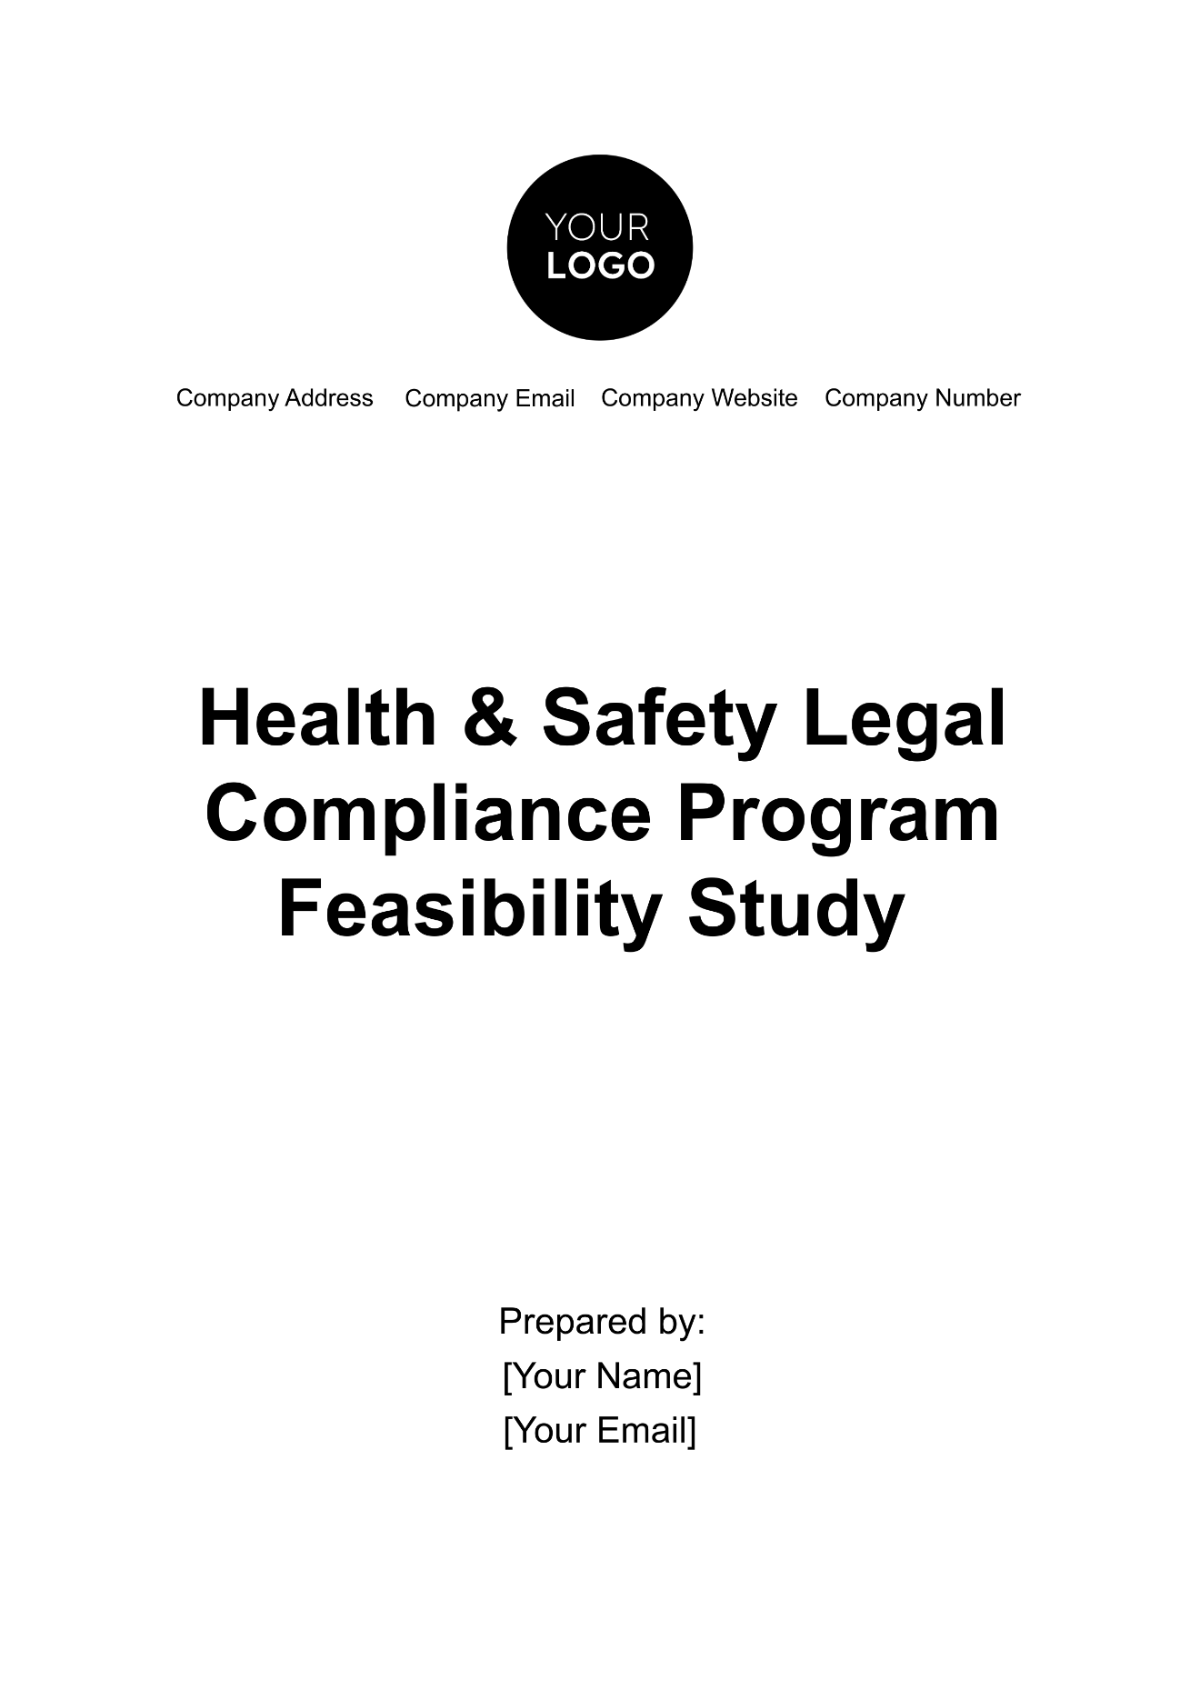 Free Health & Safety Legal Compliance Program Feasibility Study Template